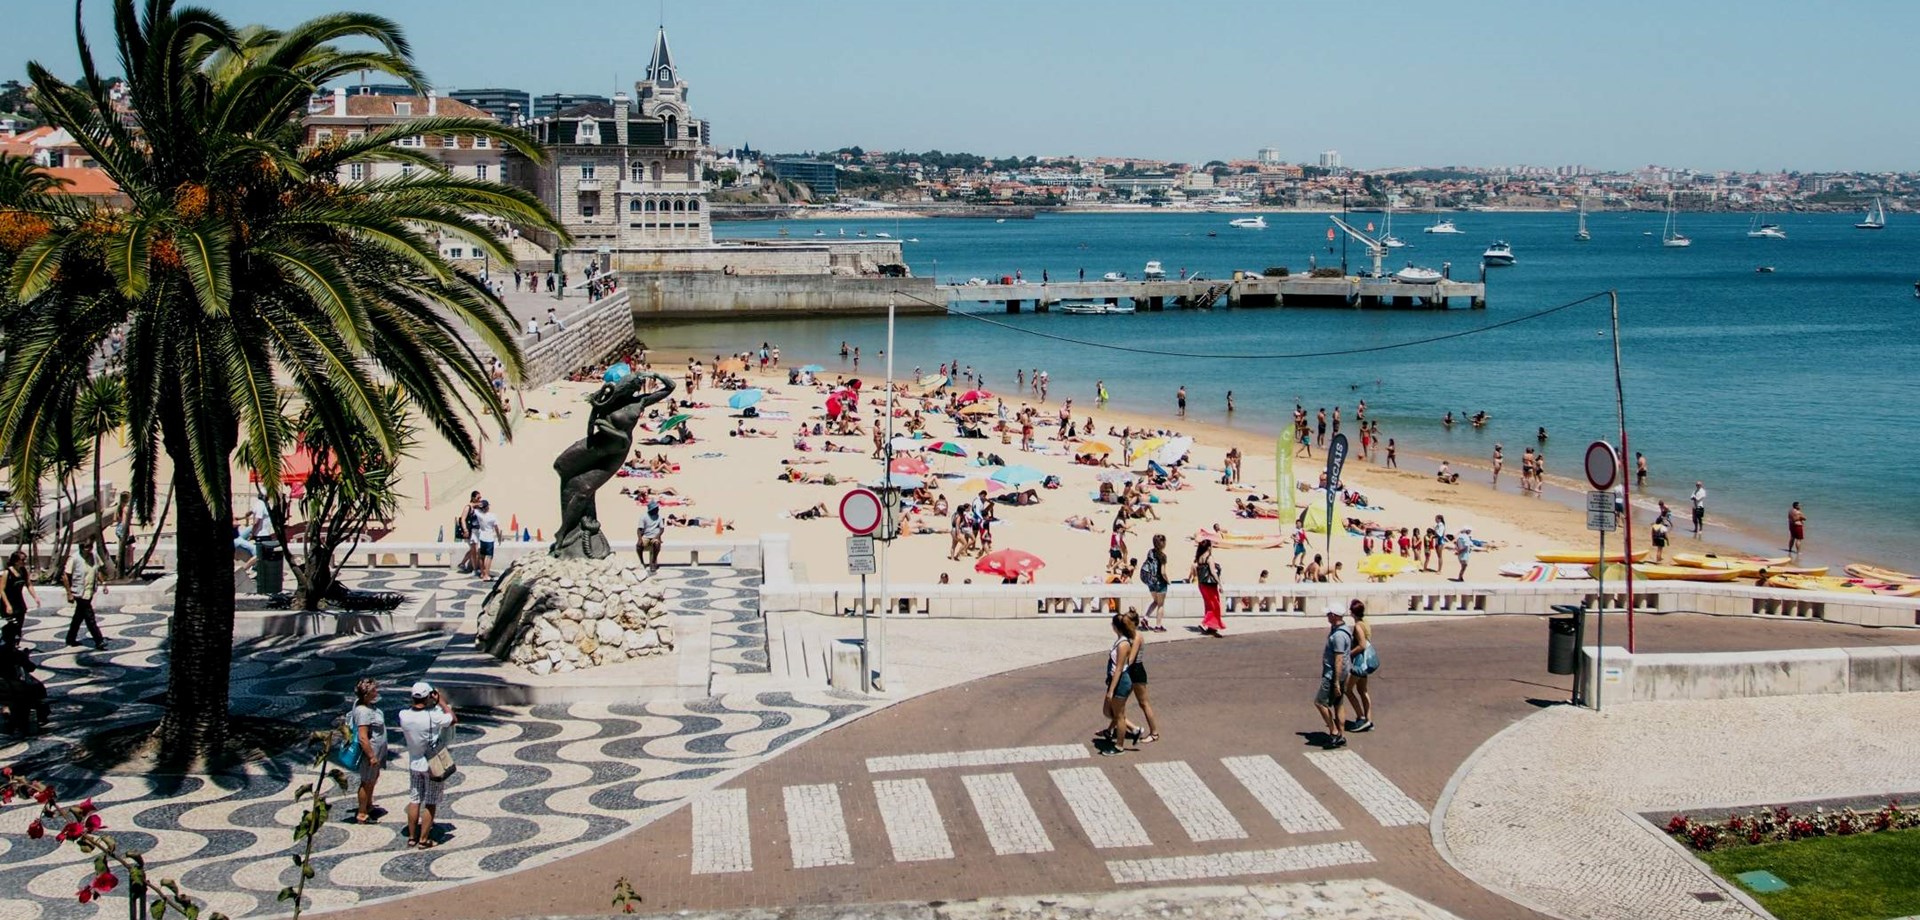 Cascais, a place belonging to the sea